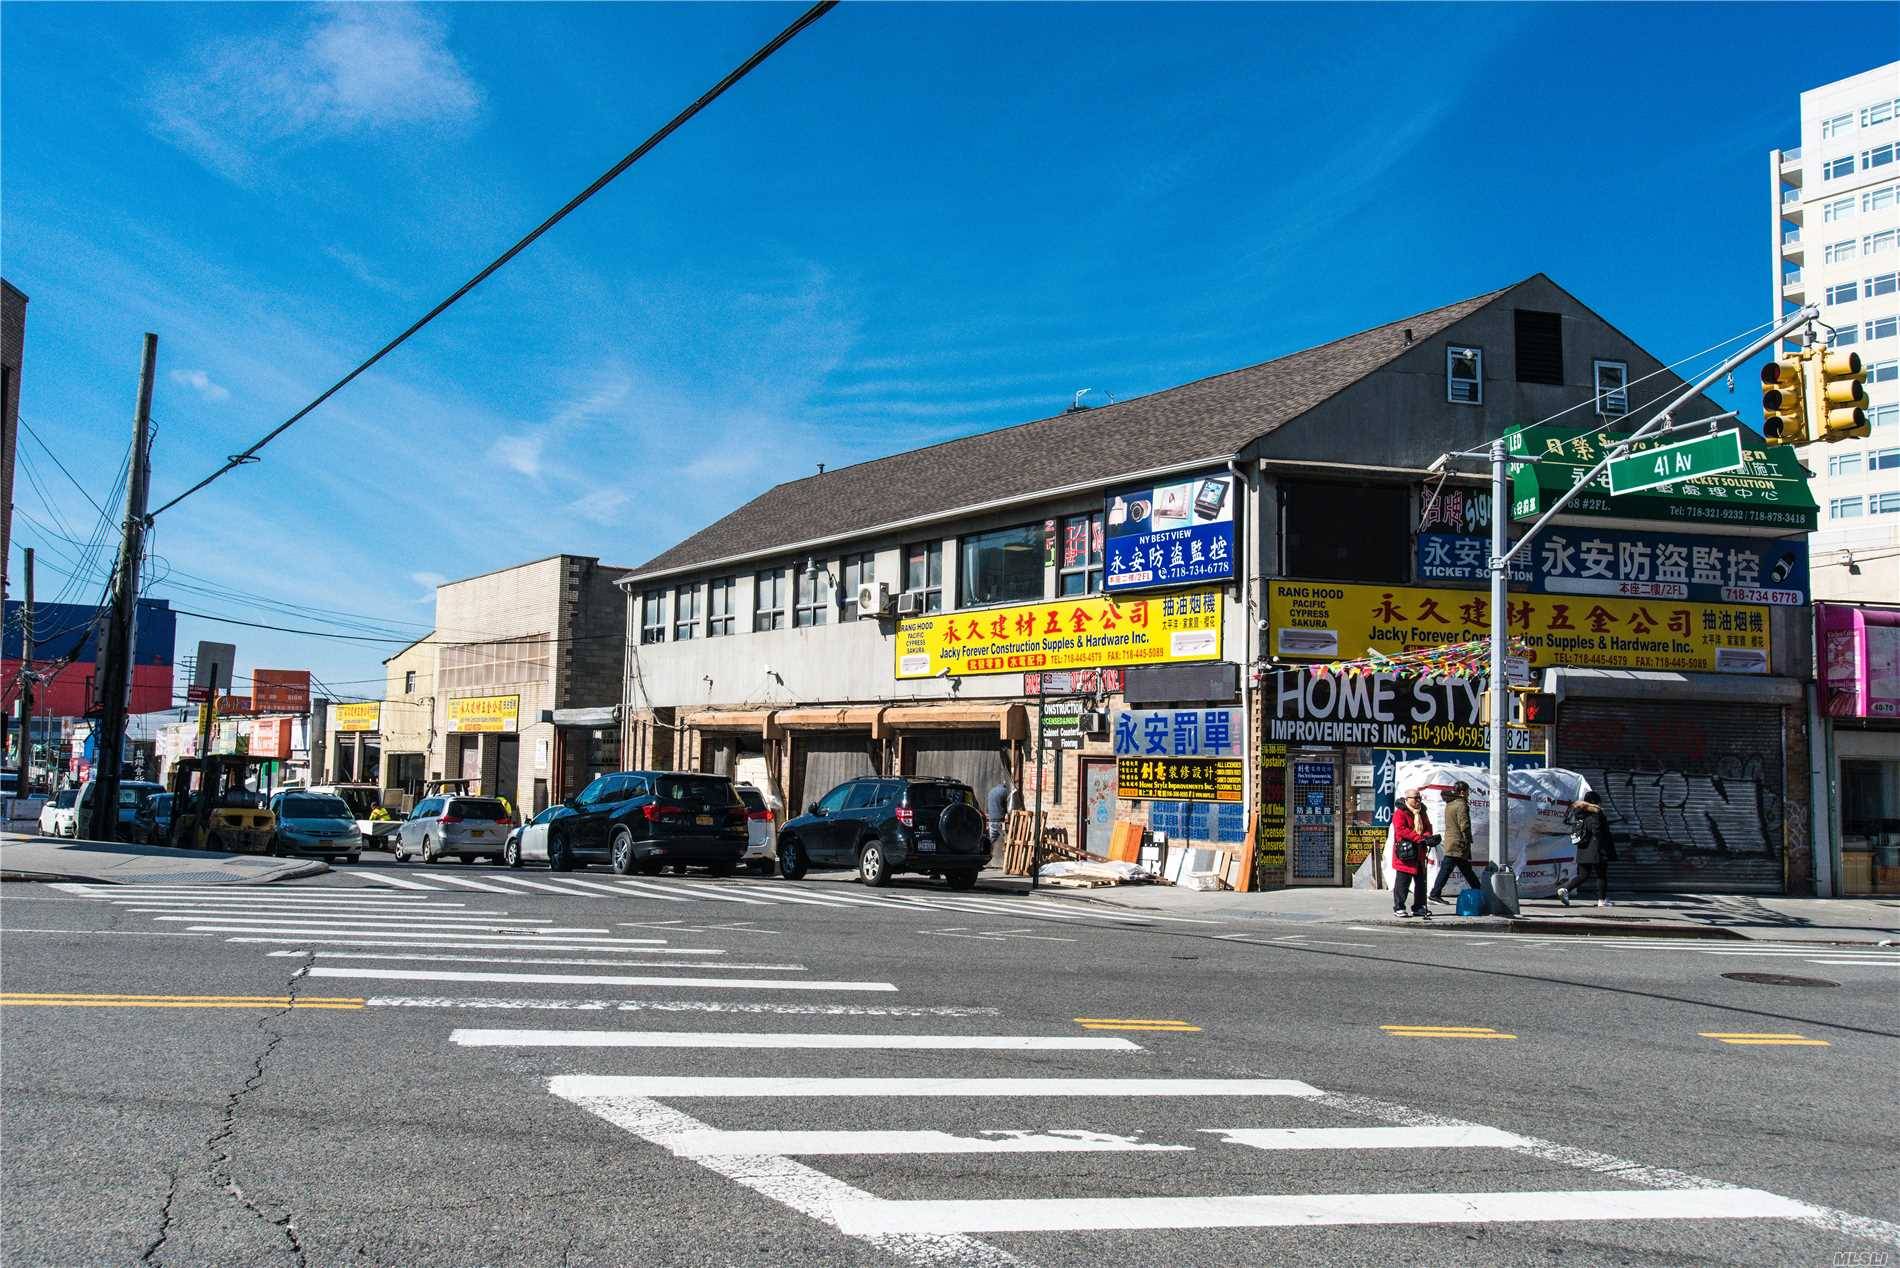 Property consists of a portfolio of 5 lots right in Downtown Flushing.